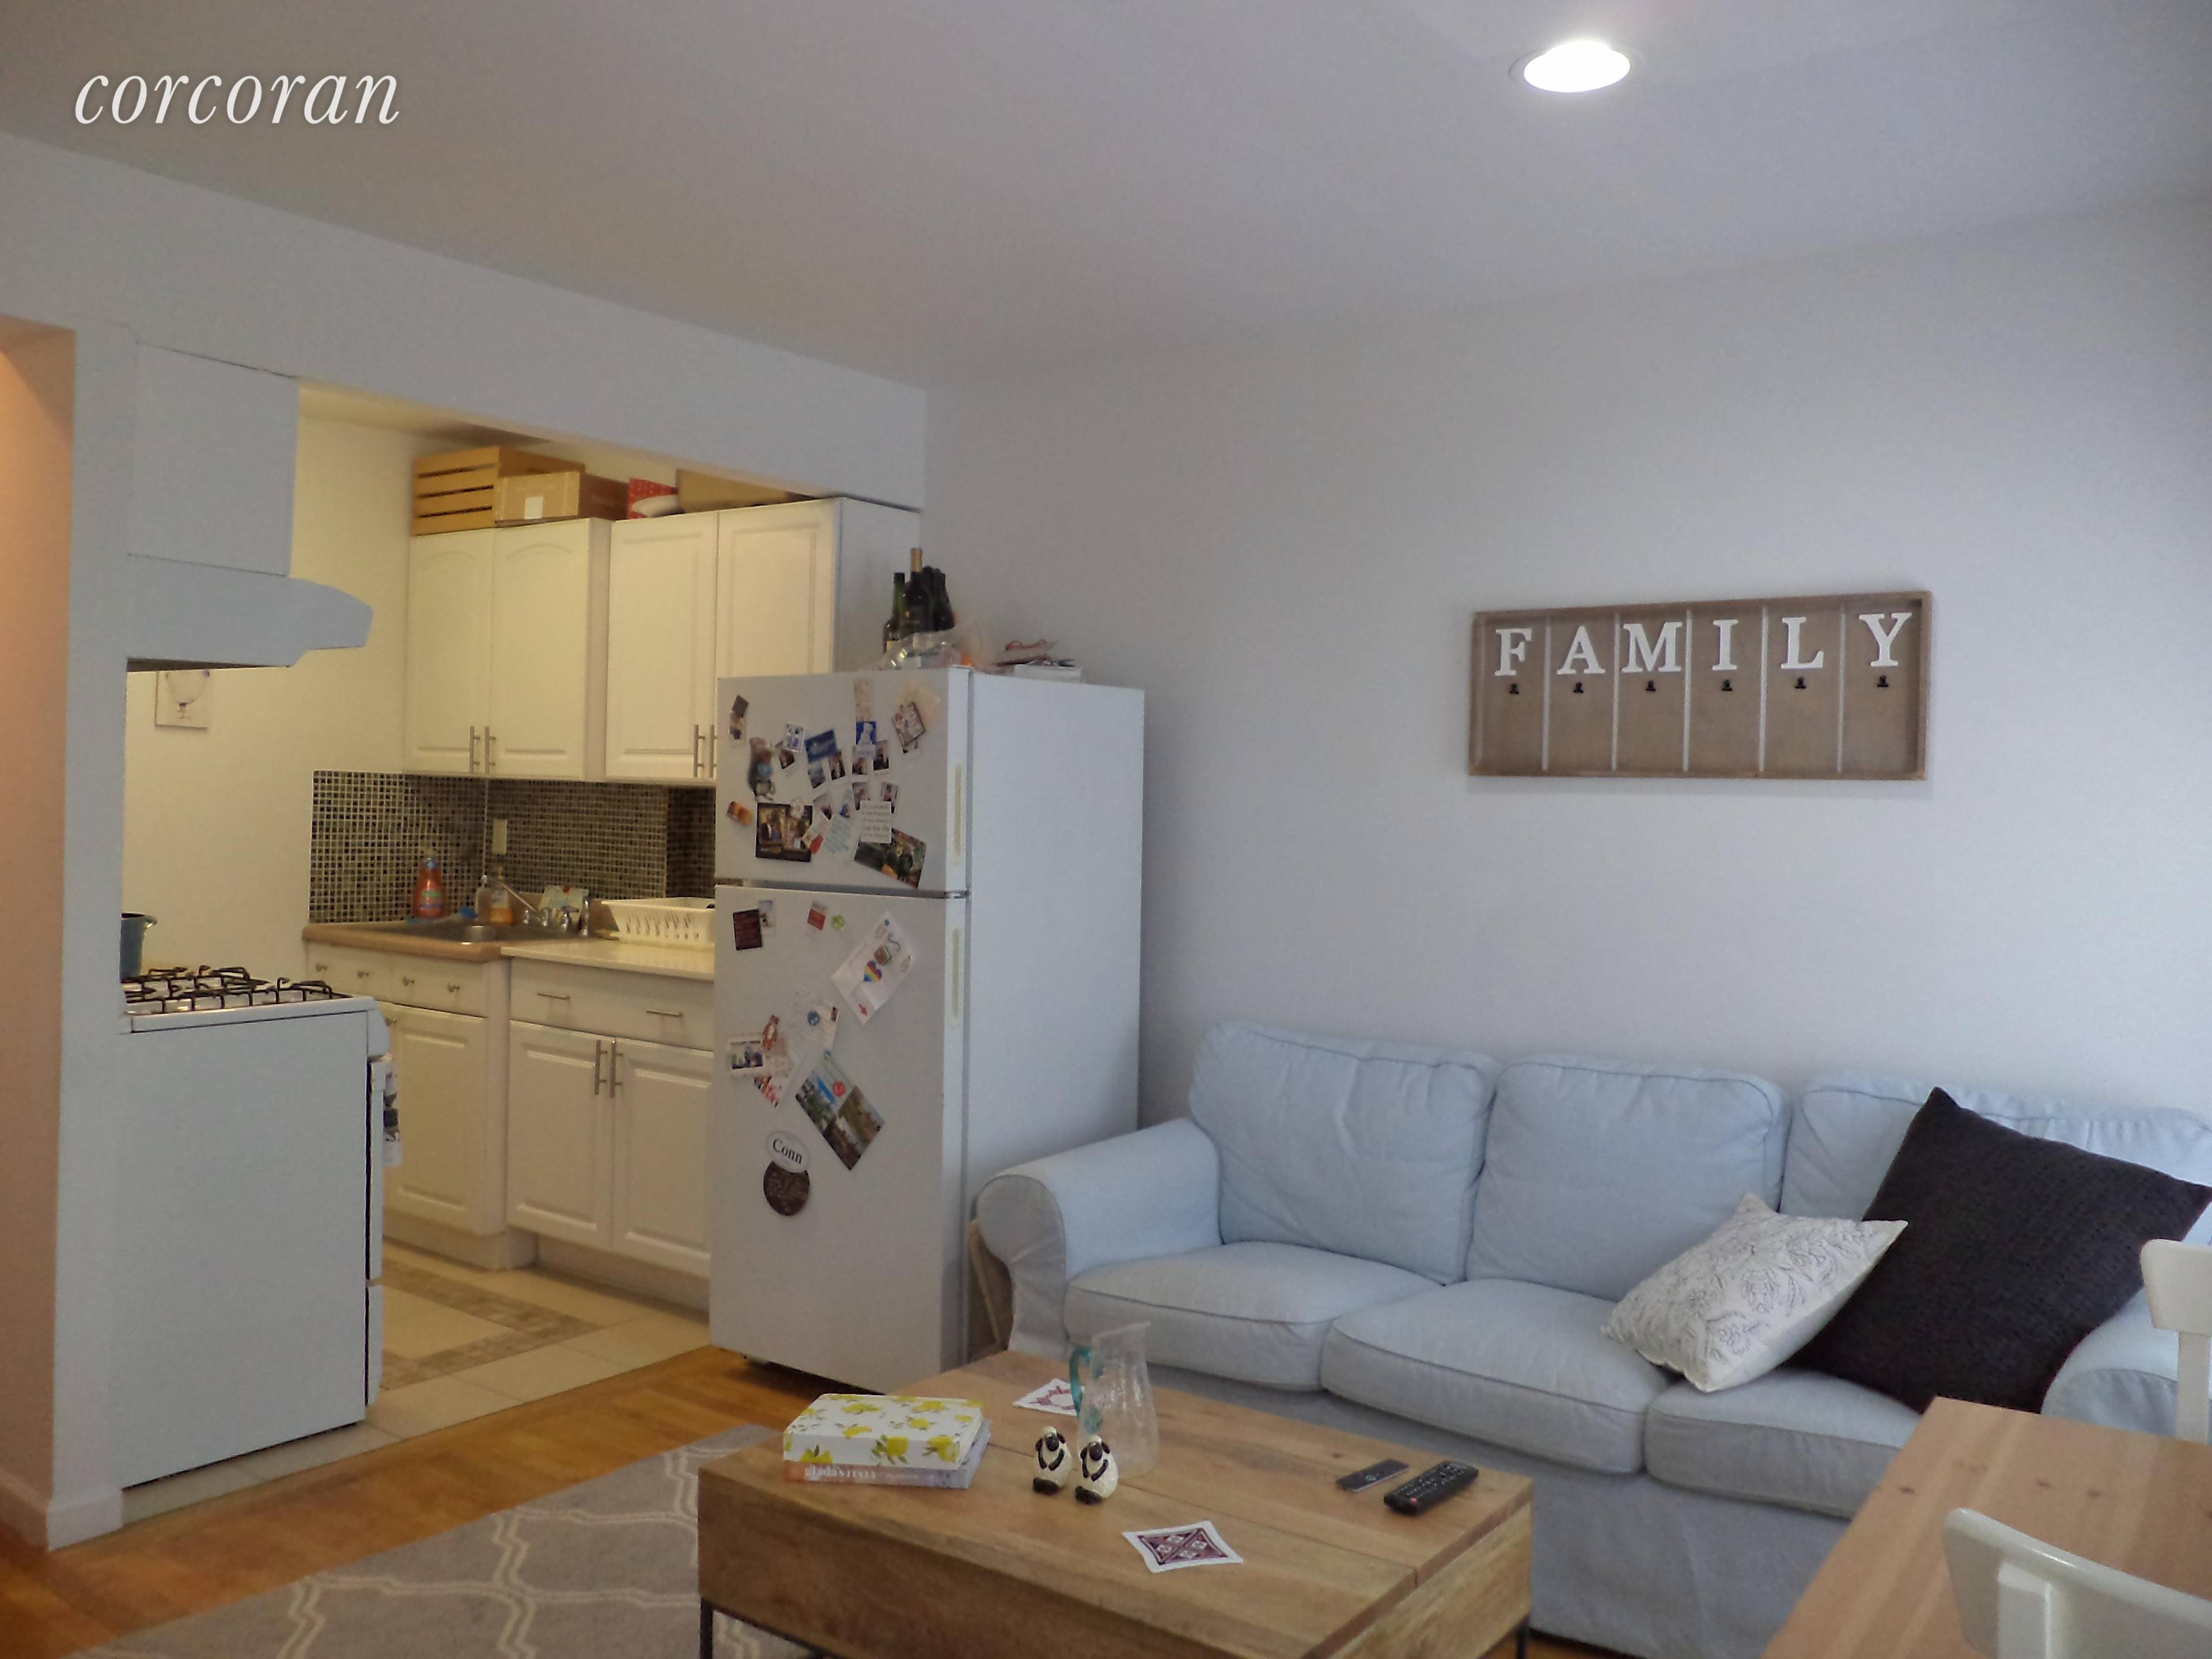 JUNE 1st MOVE INCHARMING TWO BEDROOM WALKUP Conveniently Located to the Vernon Jackson 7 Subway LineAPARTMENT FEATURES Beautiful Hardwood Floors Throughout, Ample Closet Storage, Washer Dryer Located in the Apartment ...